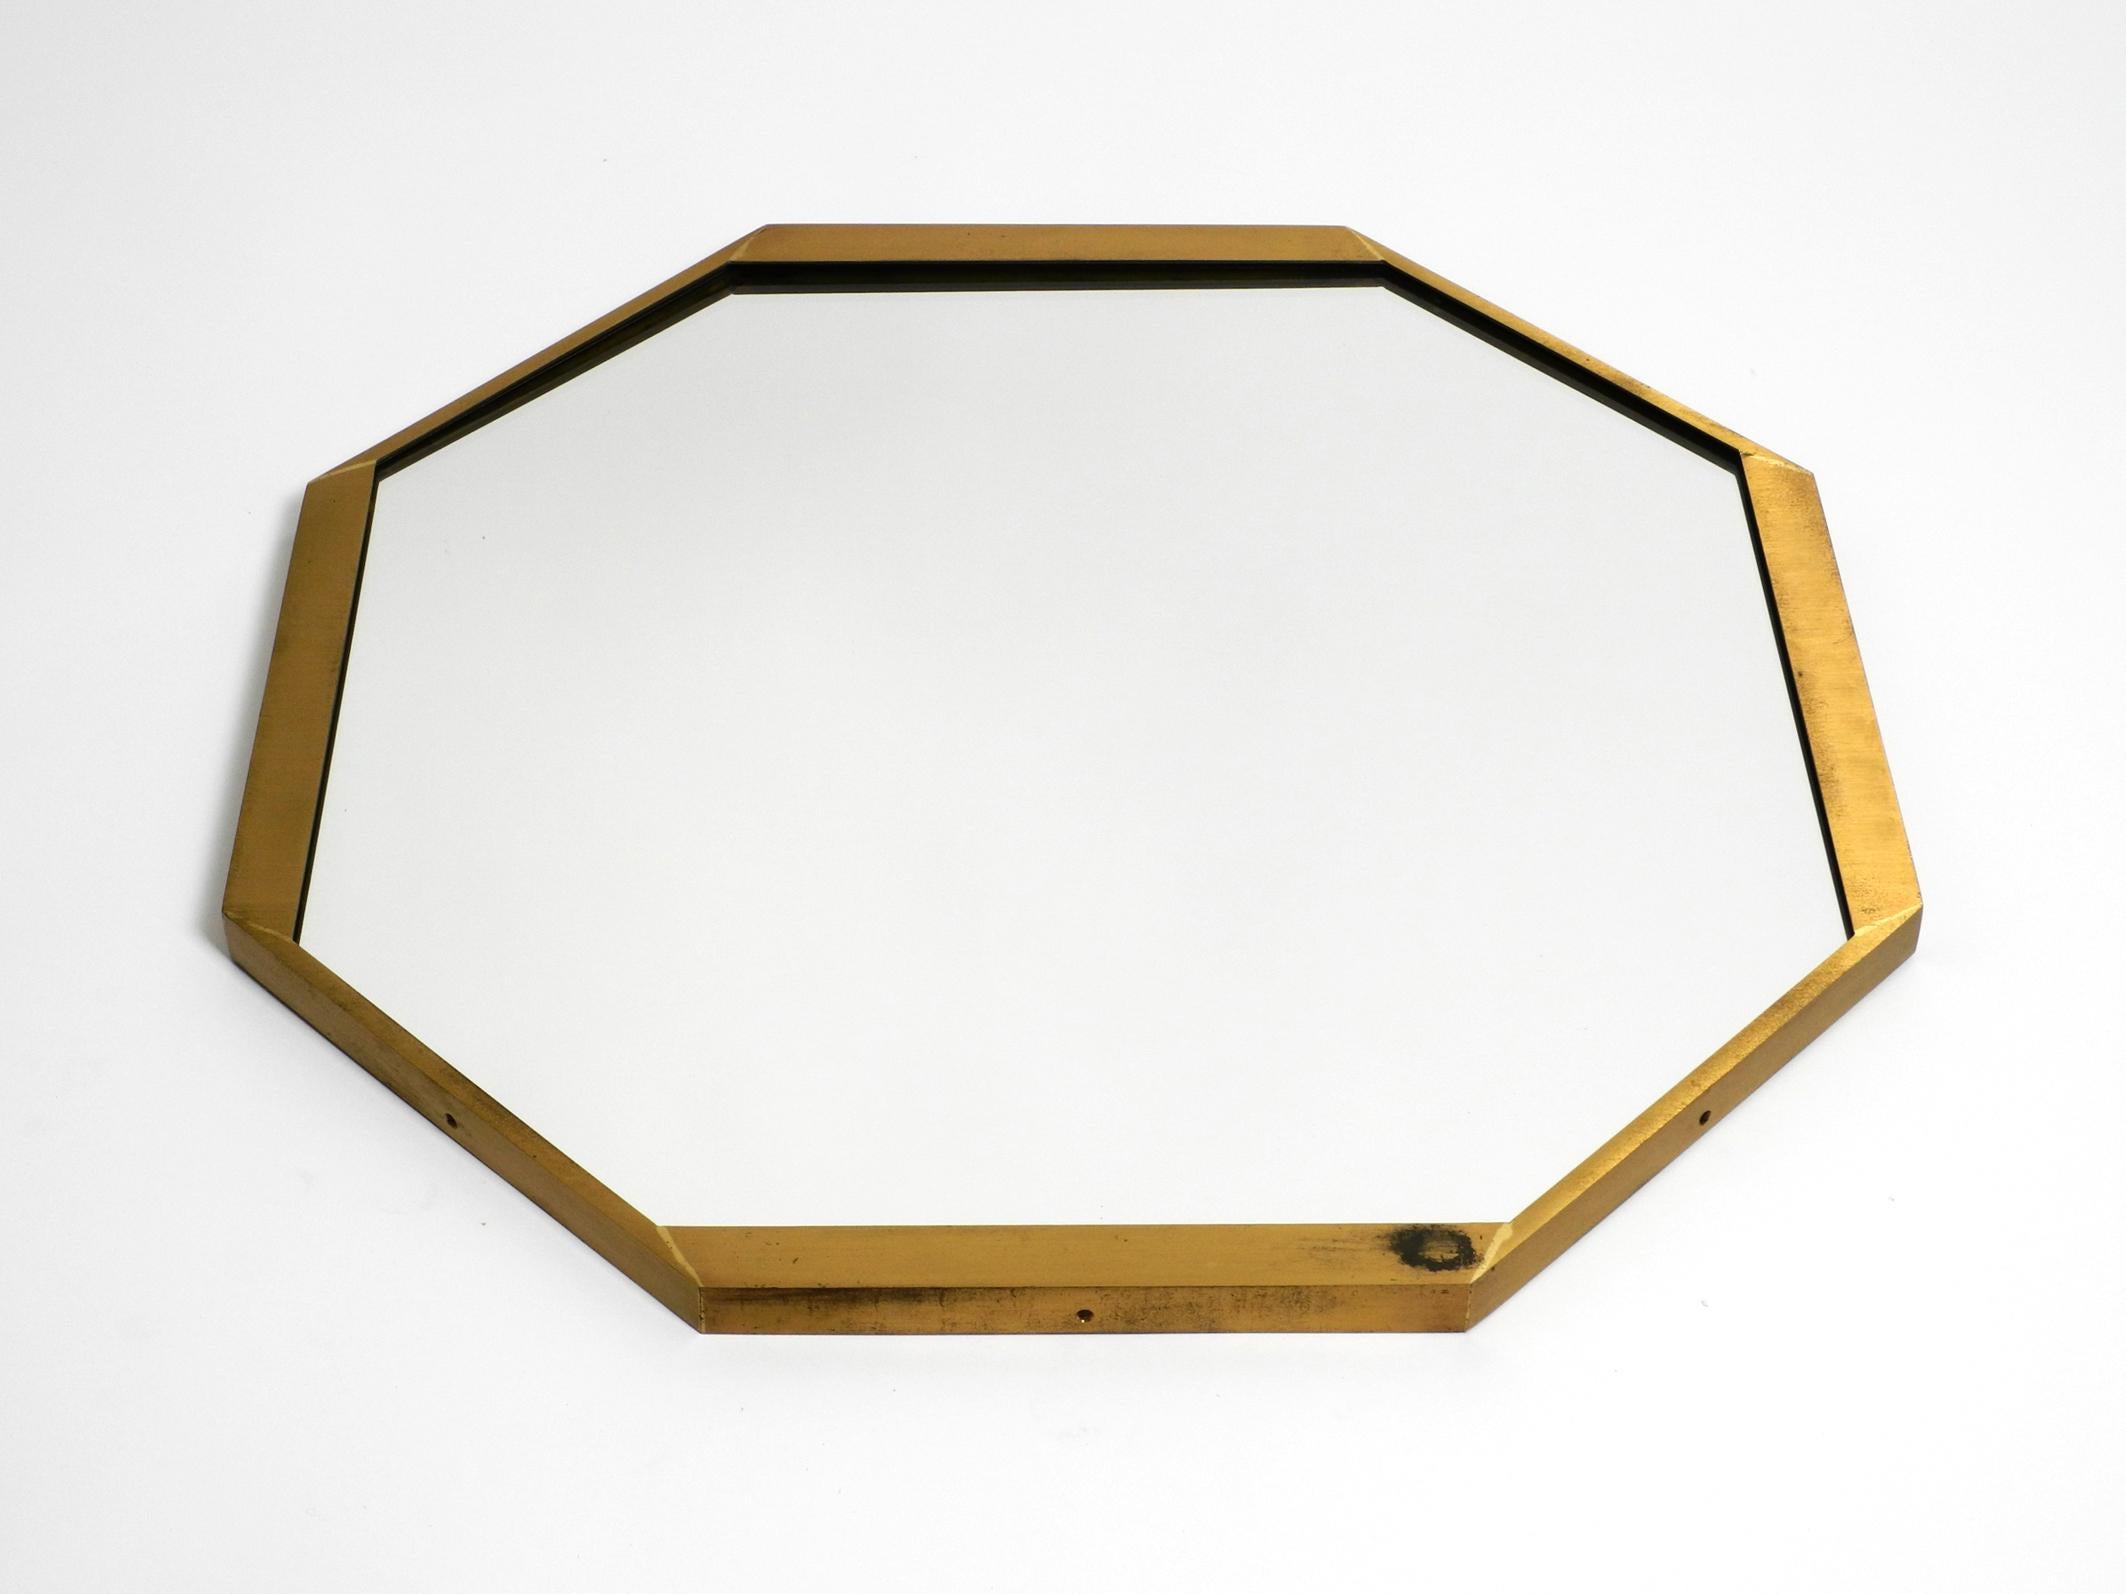 Large heavy unusual octagonal Mid Century brass wall mirror.
Great high quality design. Made in Italy.
Very good condition with no damage to the mirror glass and frame. Not blind. No bumps or dents on the brass frame.
Very light, beautiful patina on